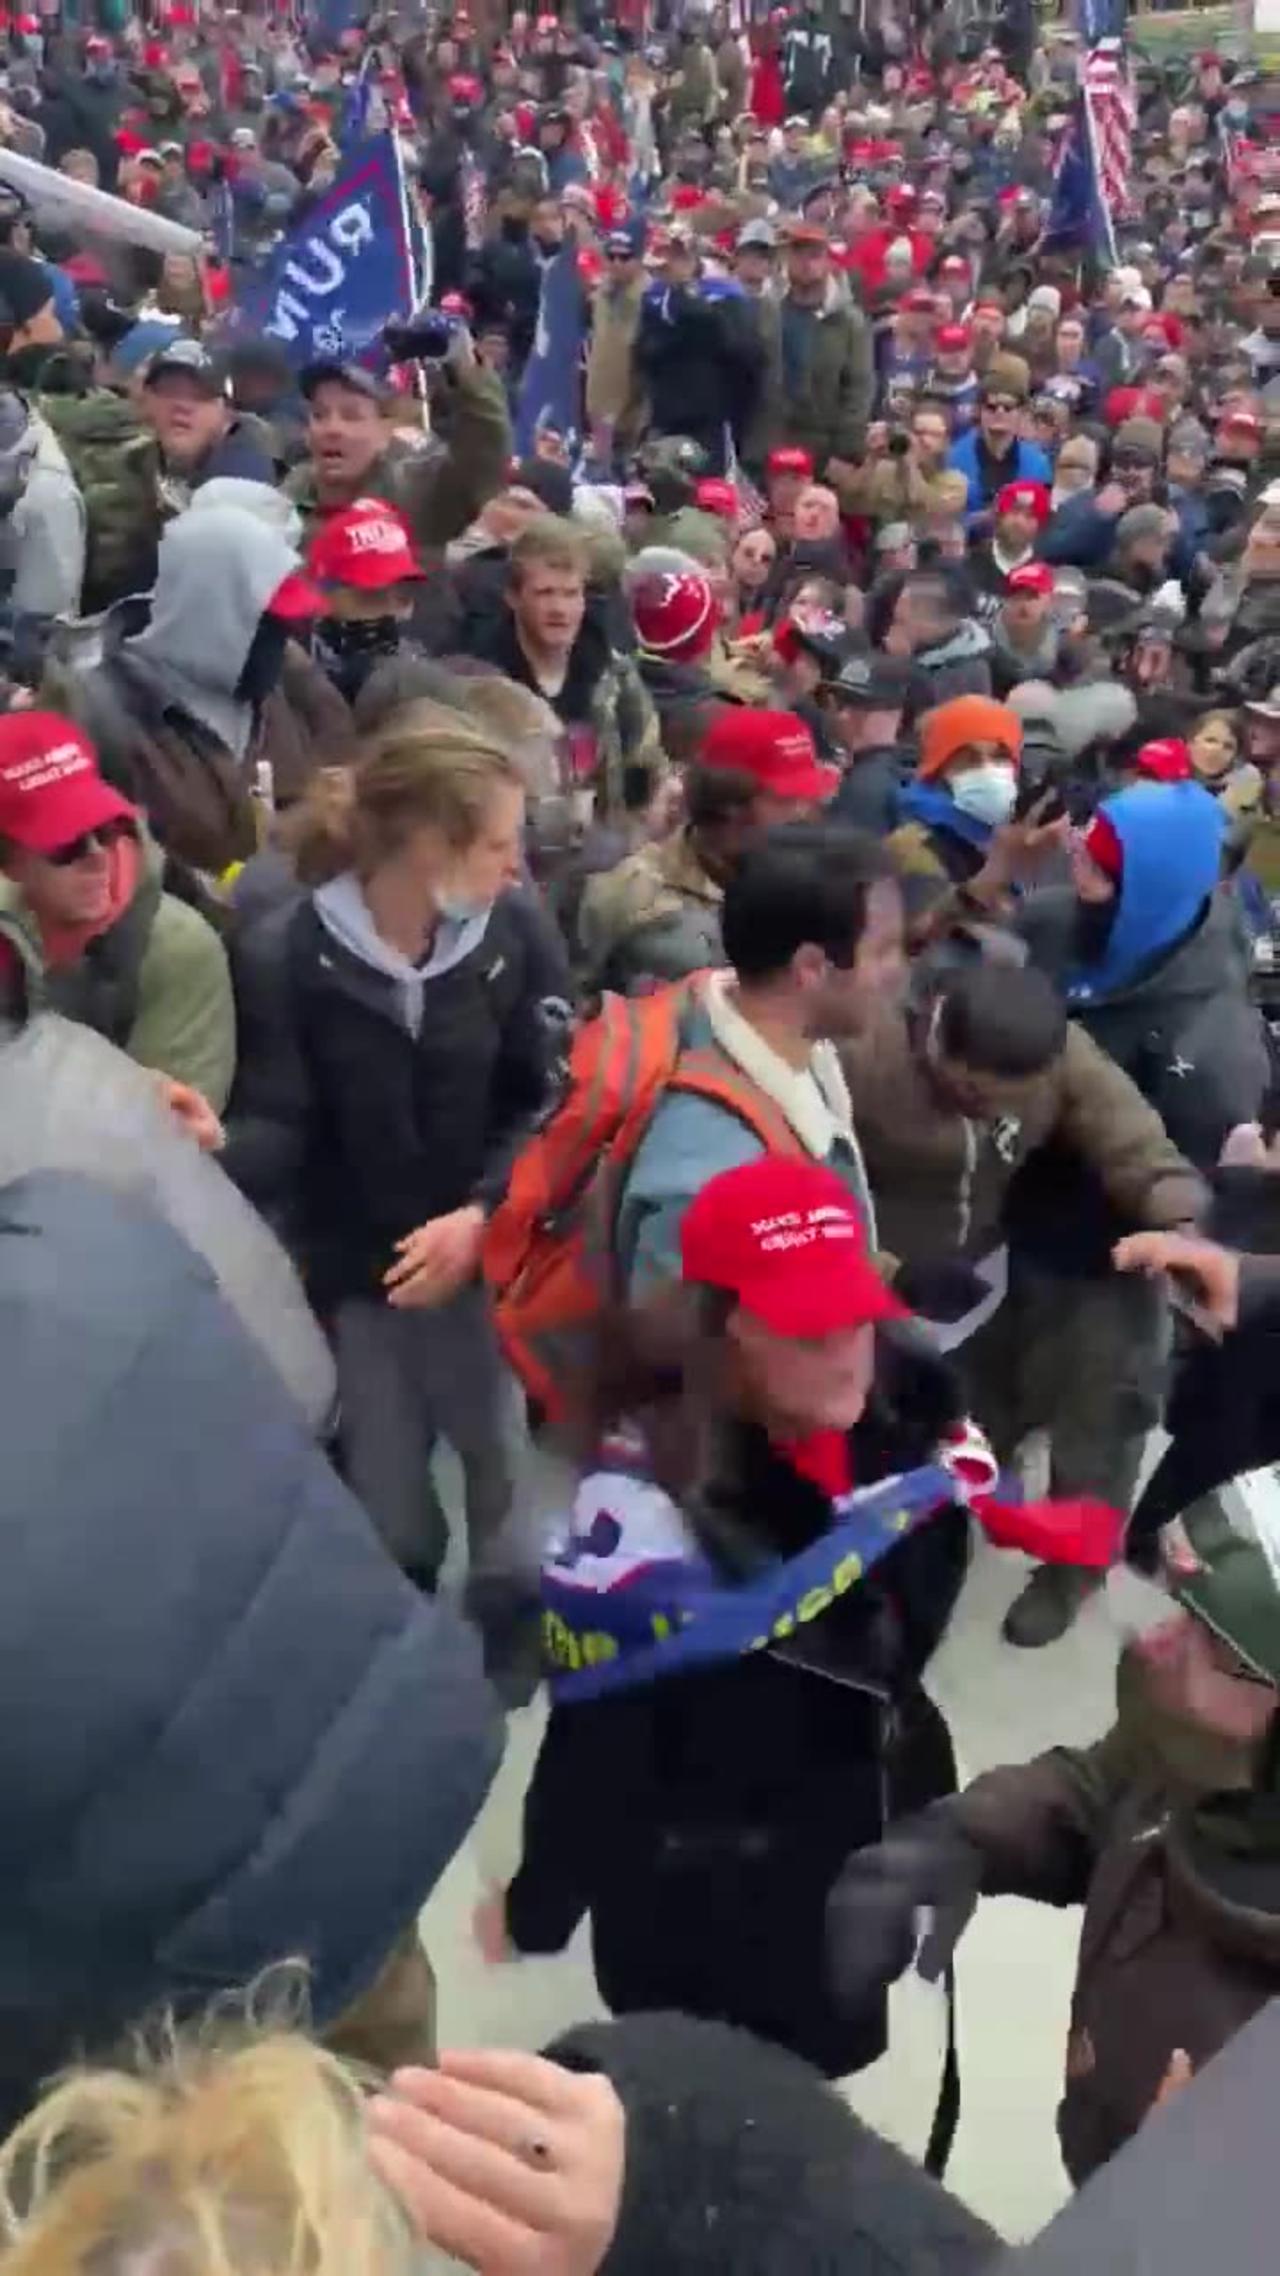 J6 video emerges showing TRUMP SUPPORTERS attempting to stop people